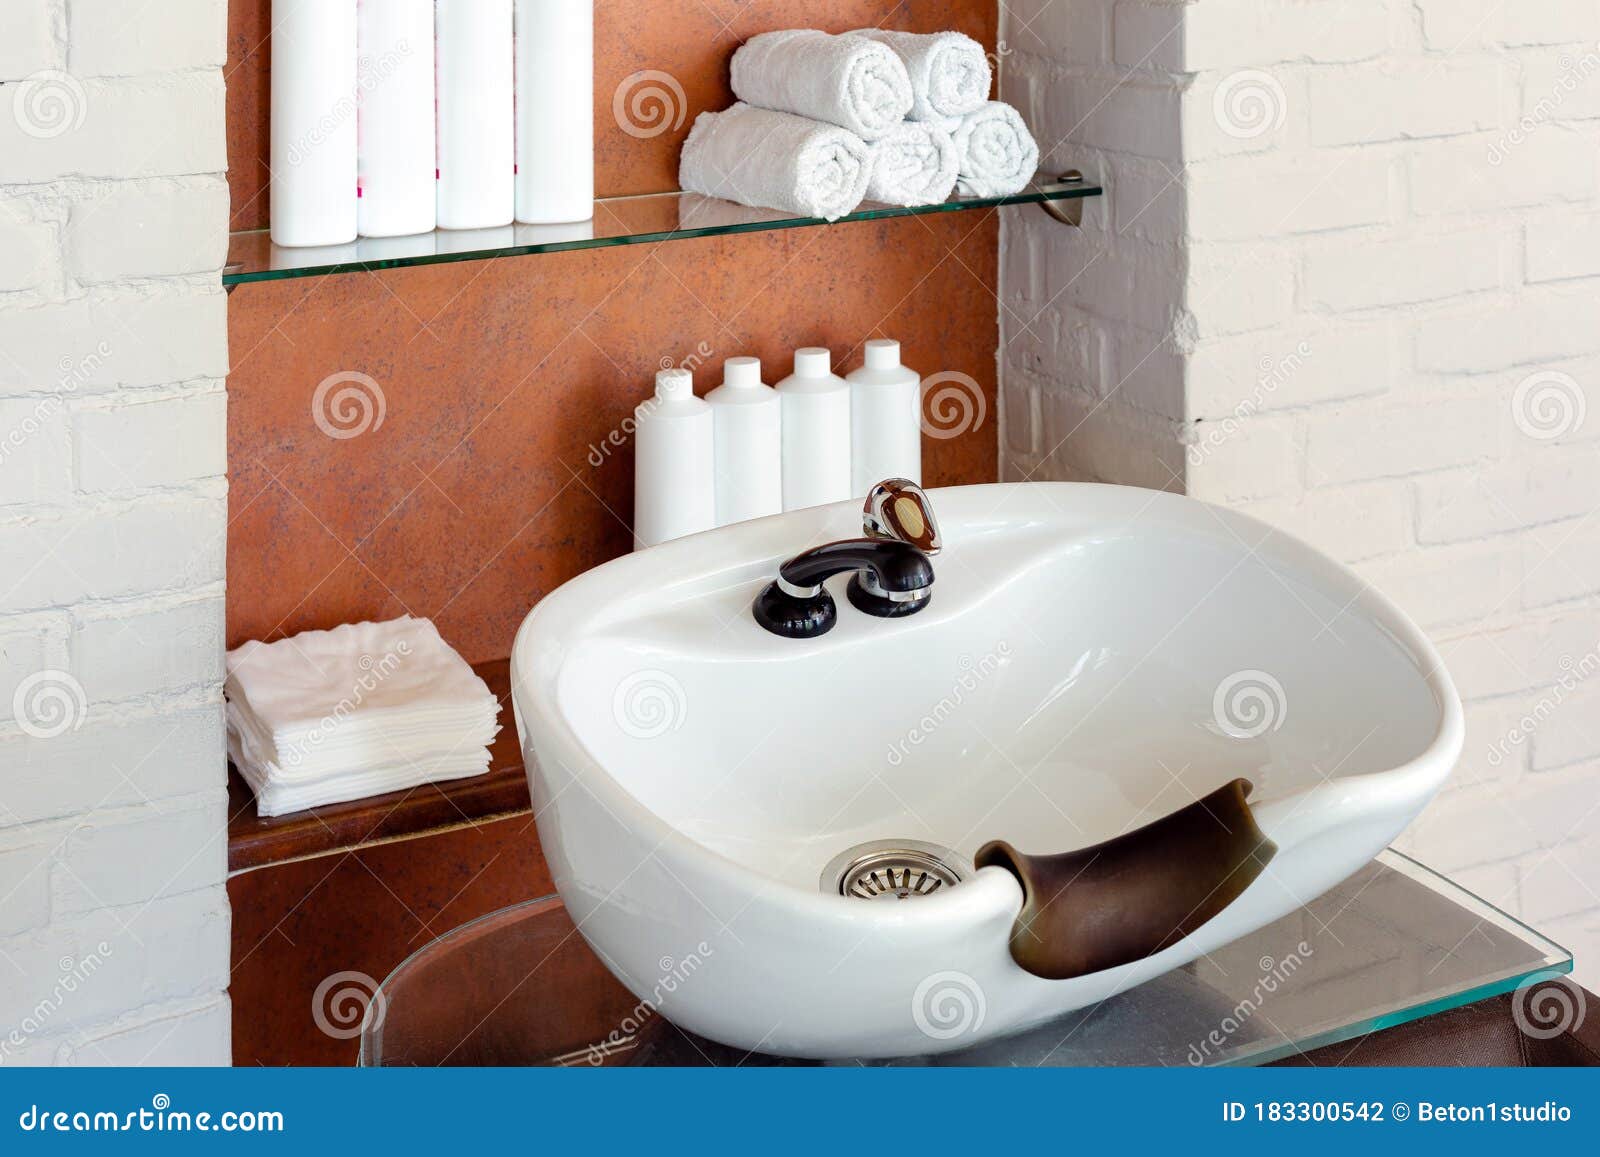 Wash Sink for Washing Hair in Beauty Salon or Barber Shop. Hairdresser  Stylist Work Space Stock Photo - Image of hairdressing, hair: 183300542